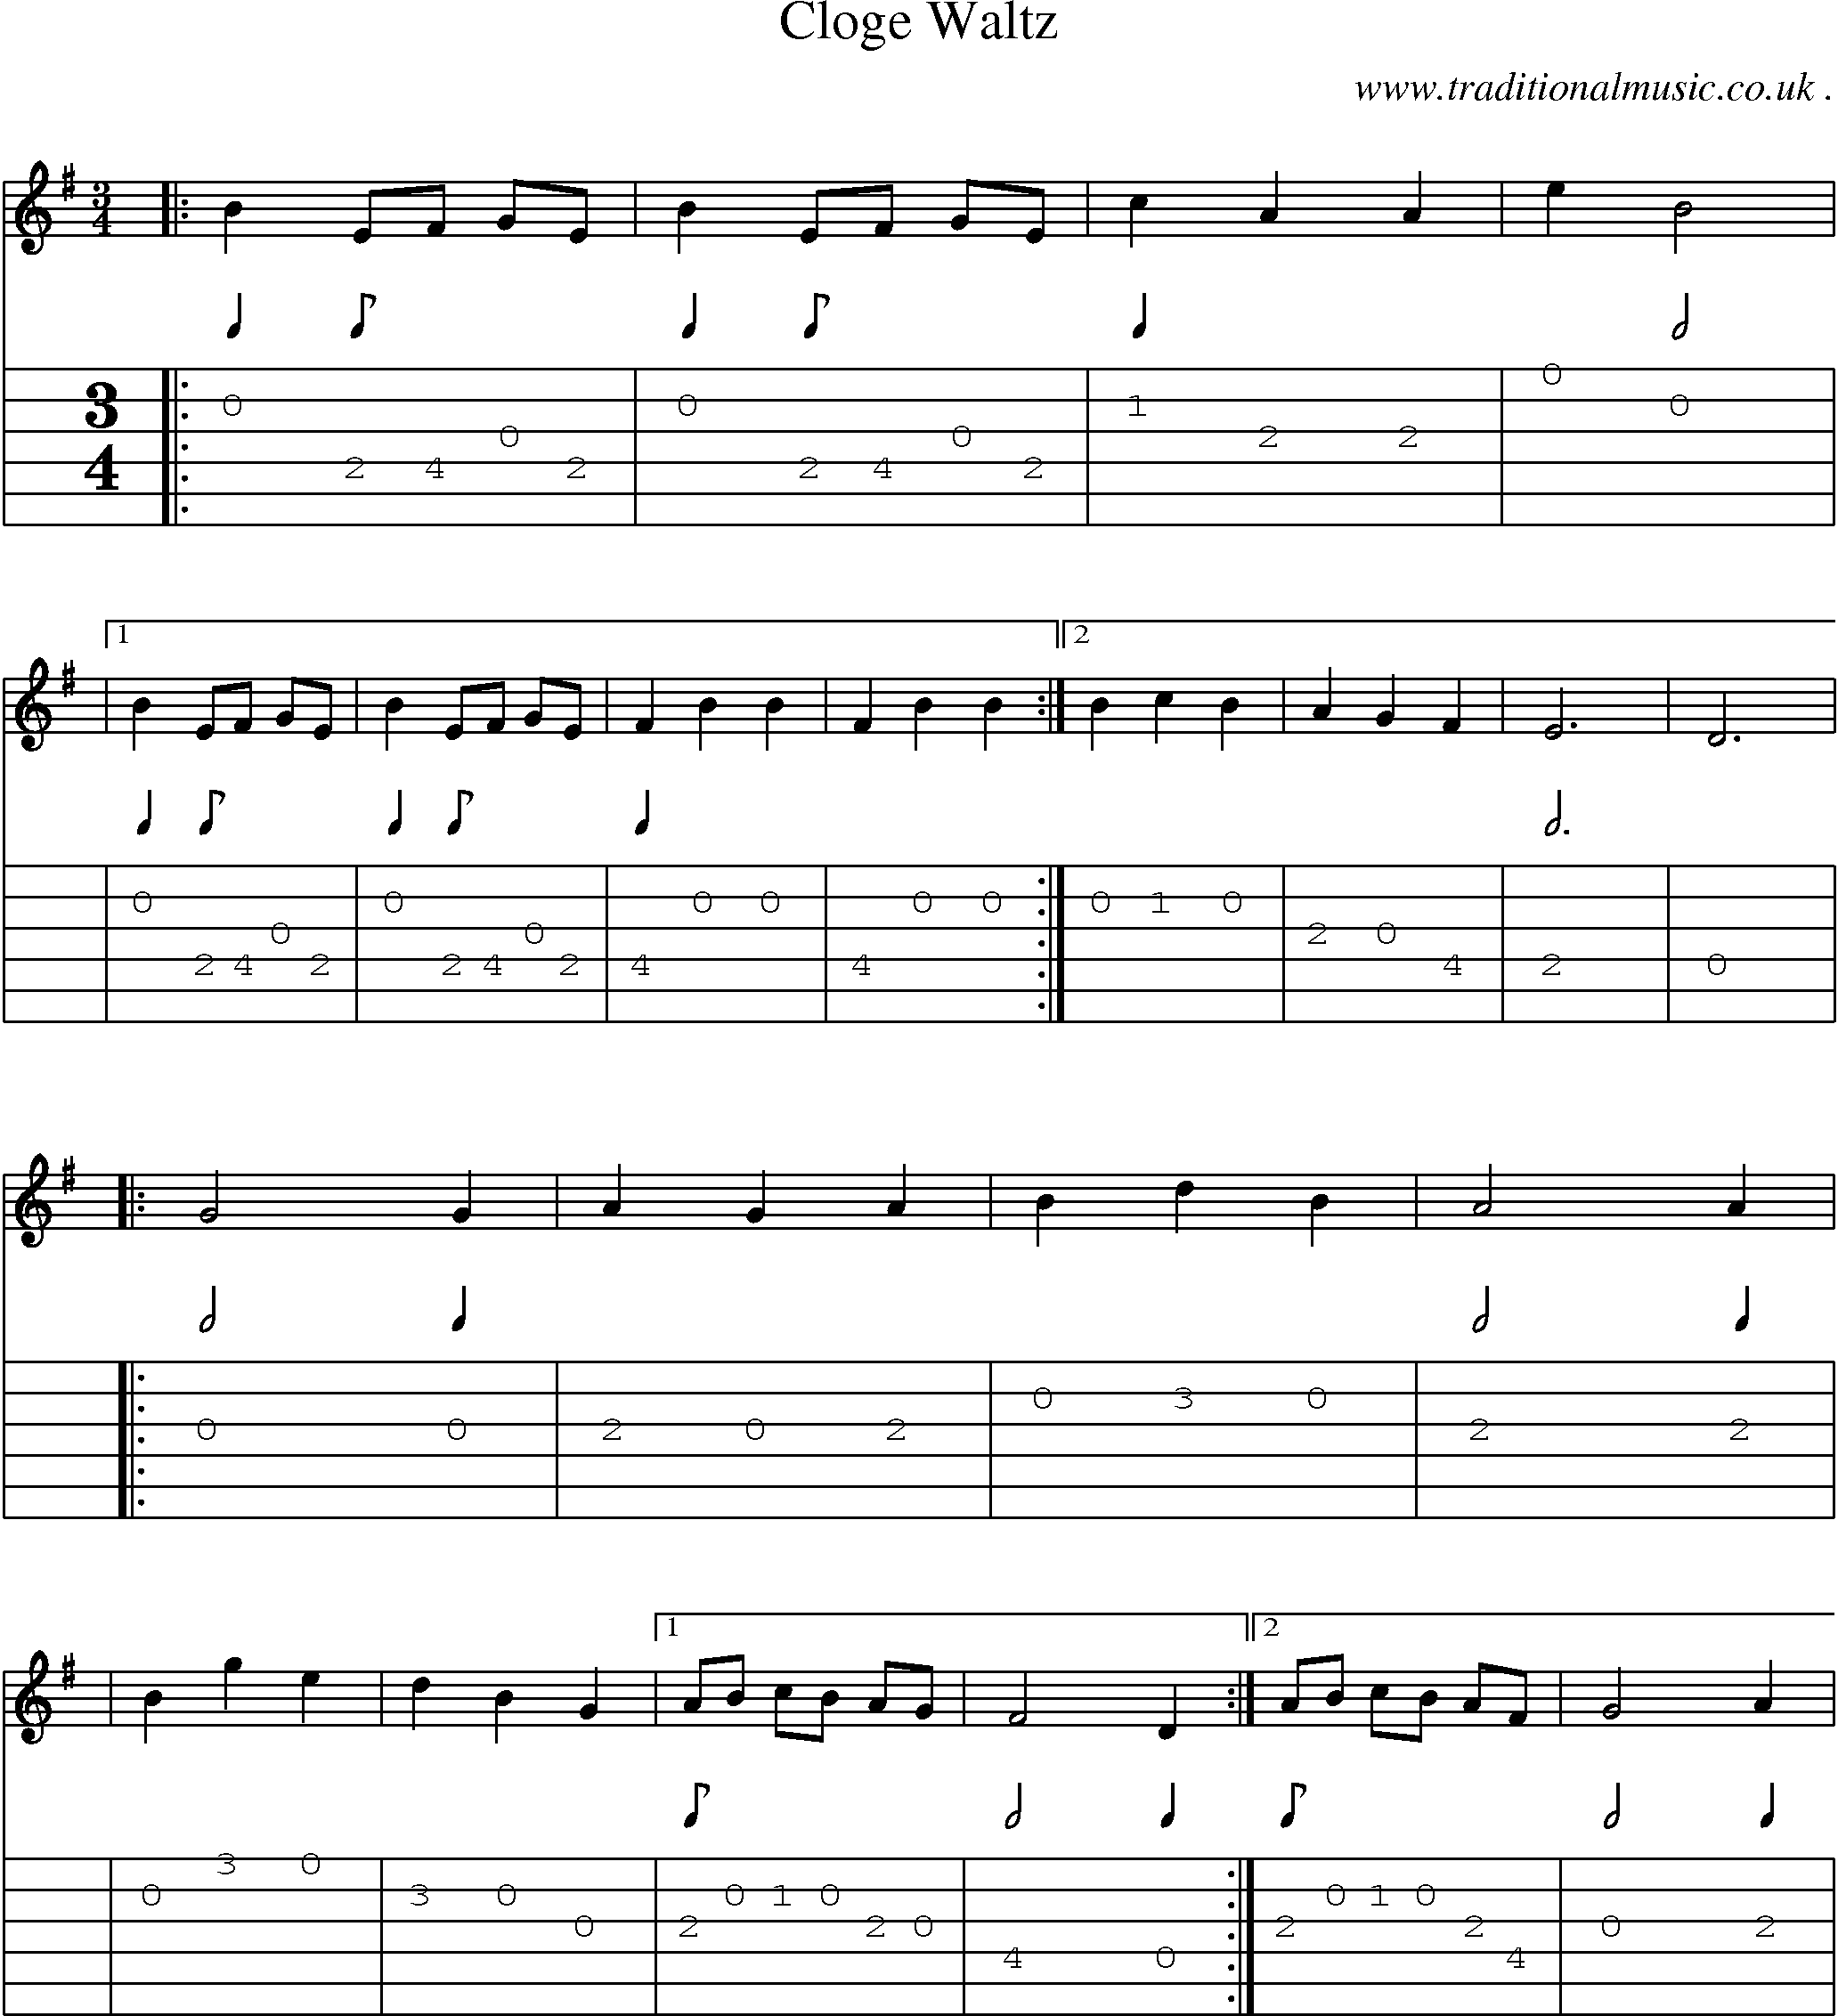 Sheet-Music and Guitar Tabs for Cloge Waltz